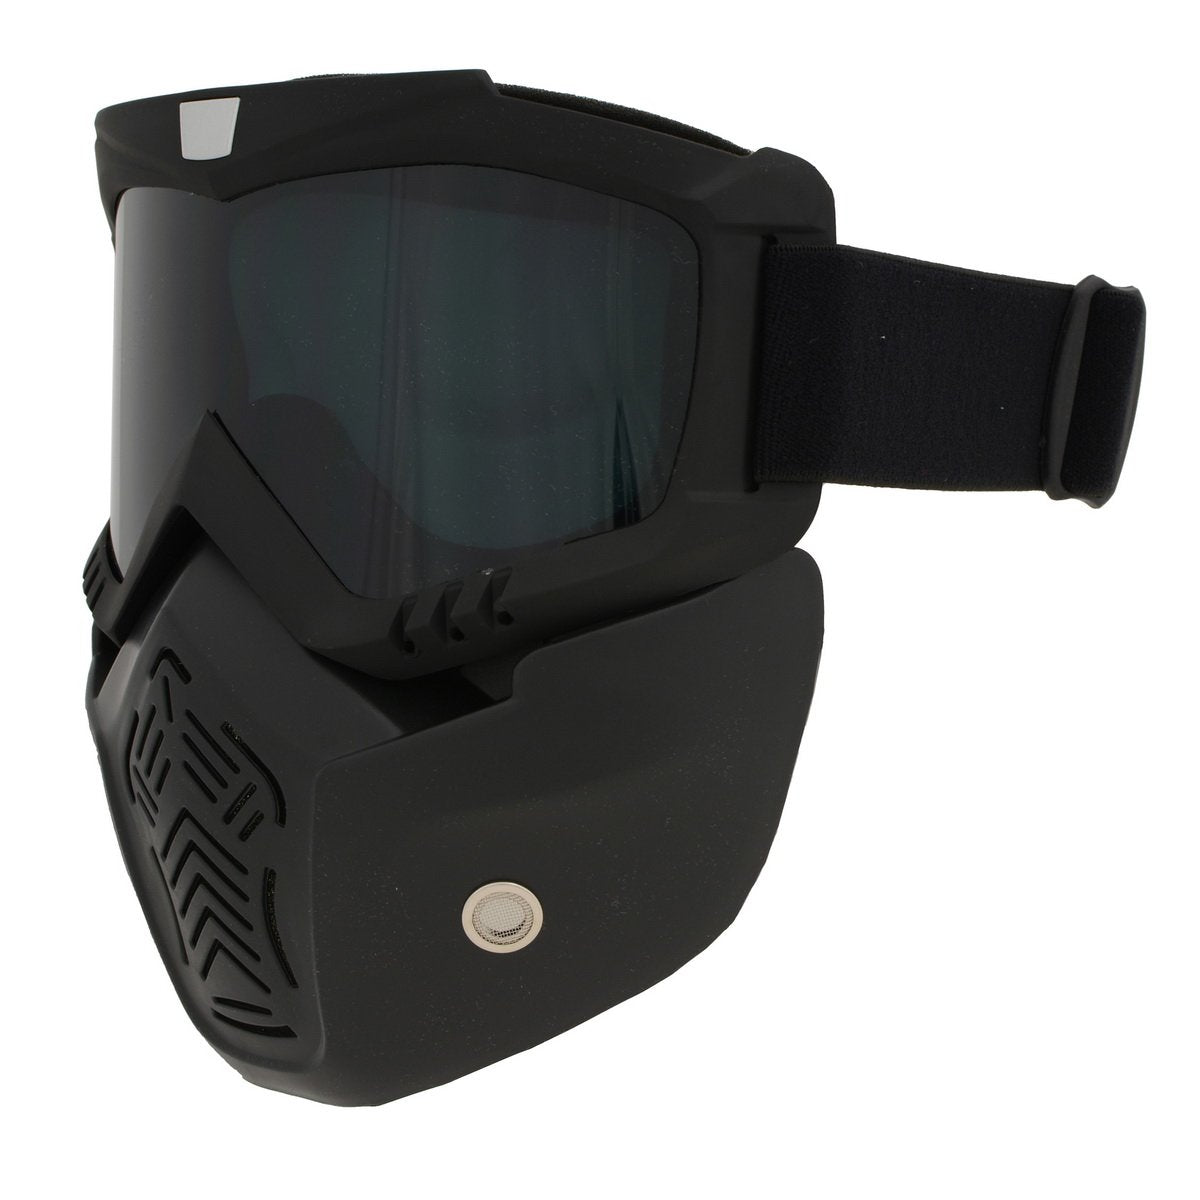 Milwaukee Performance MP7921FM 'Drift' Full Face Mask with Goggles and Detachable Muffle